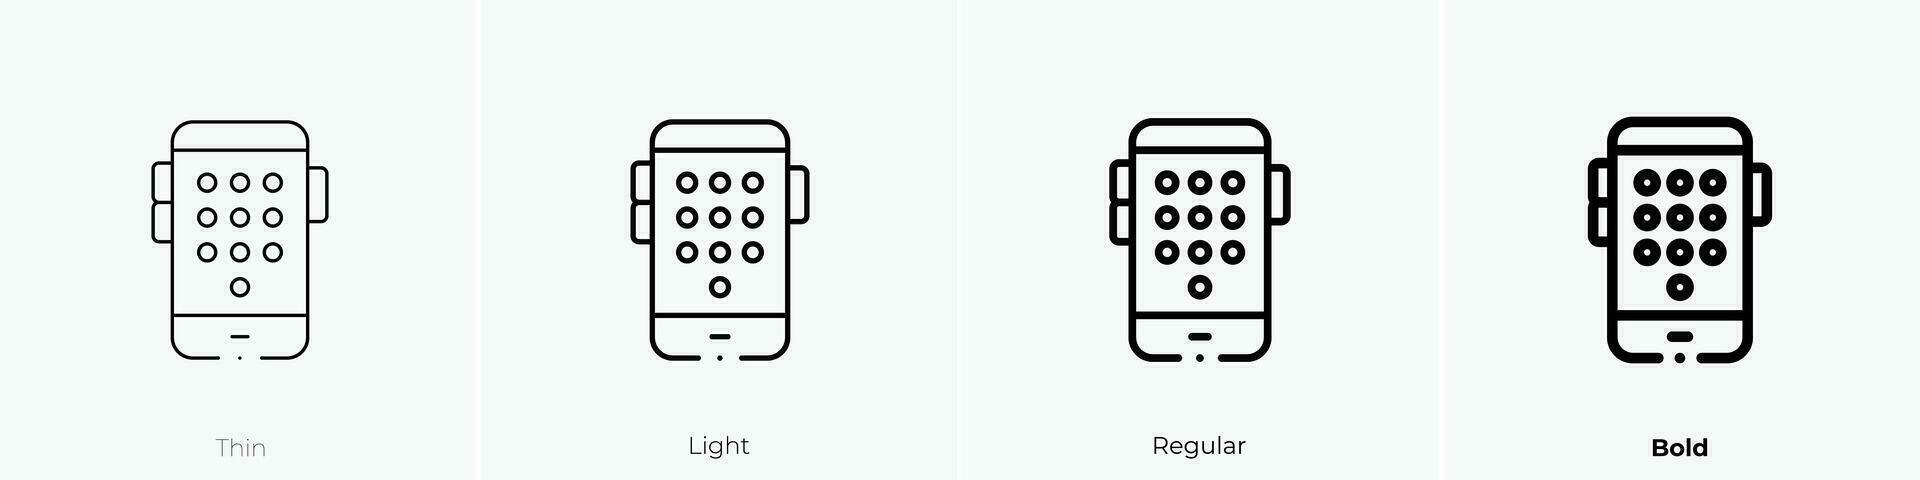 phone icon. Thin, Light, Regular And Bold style design isolated on white background vector